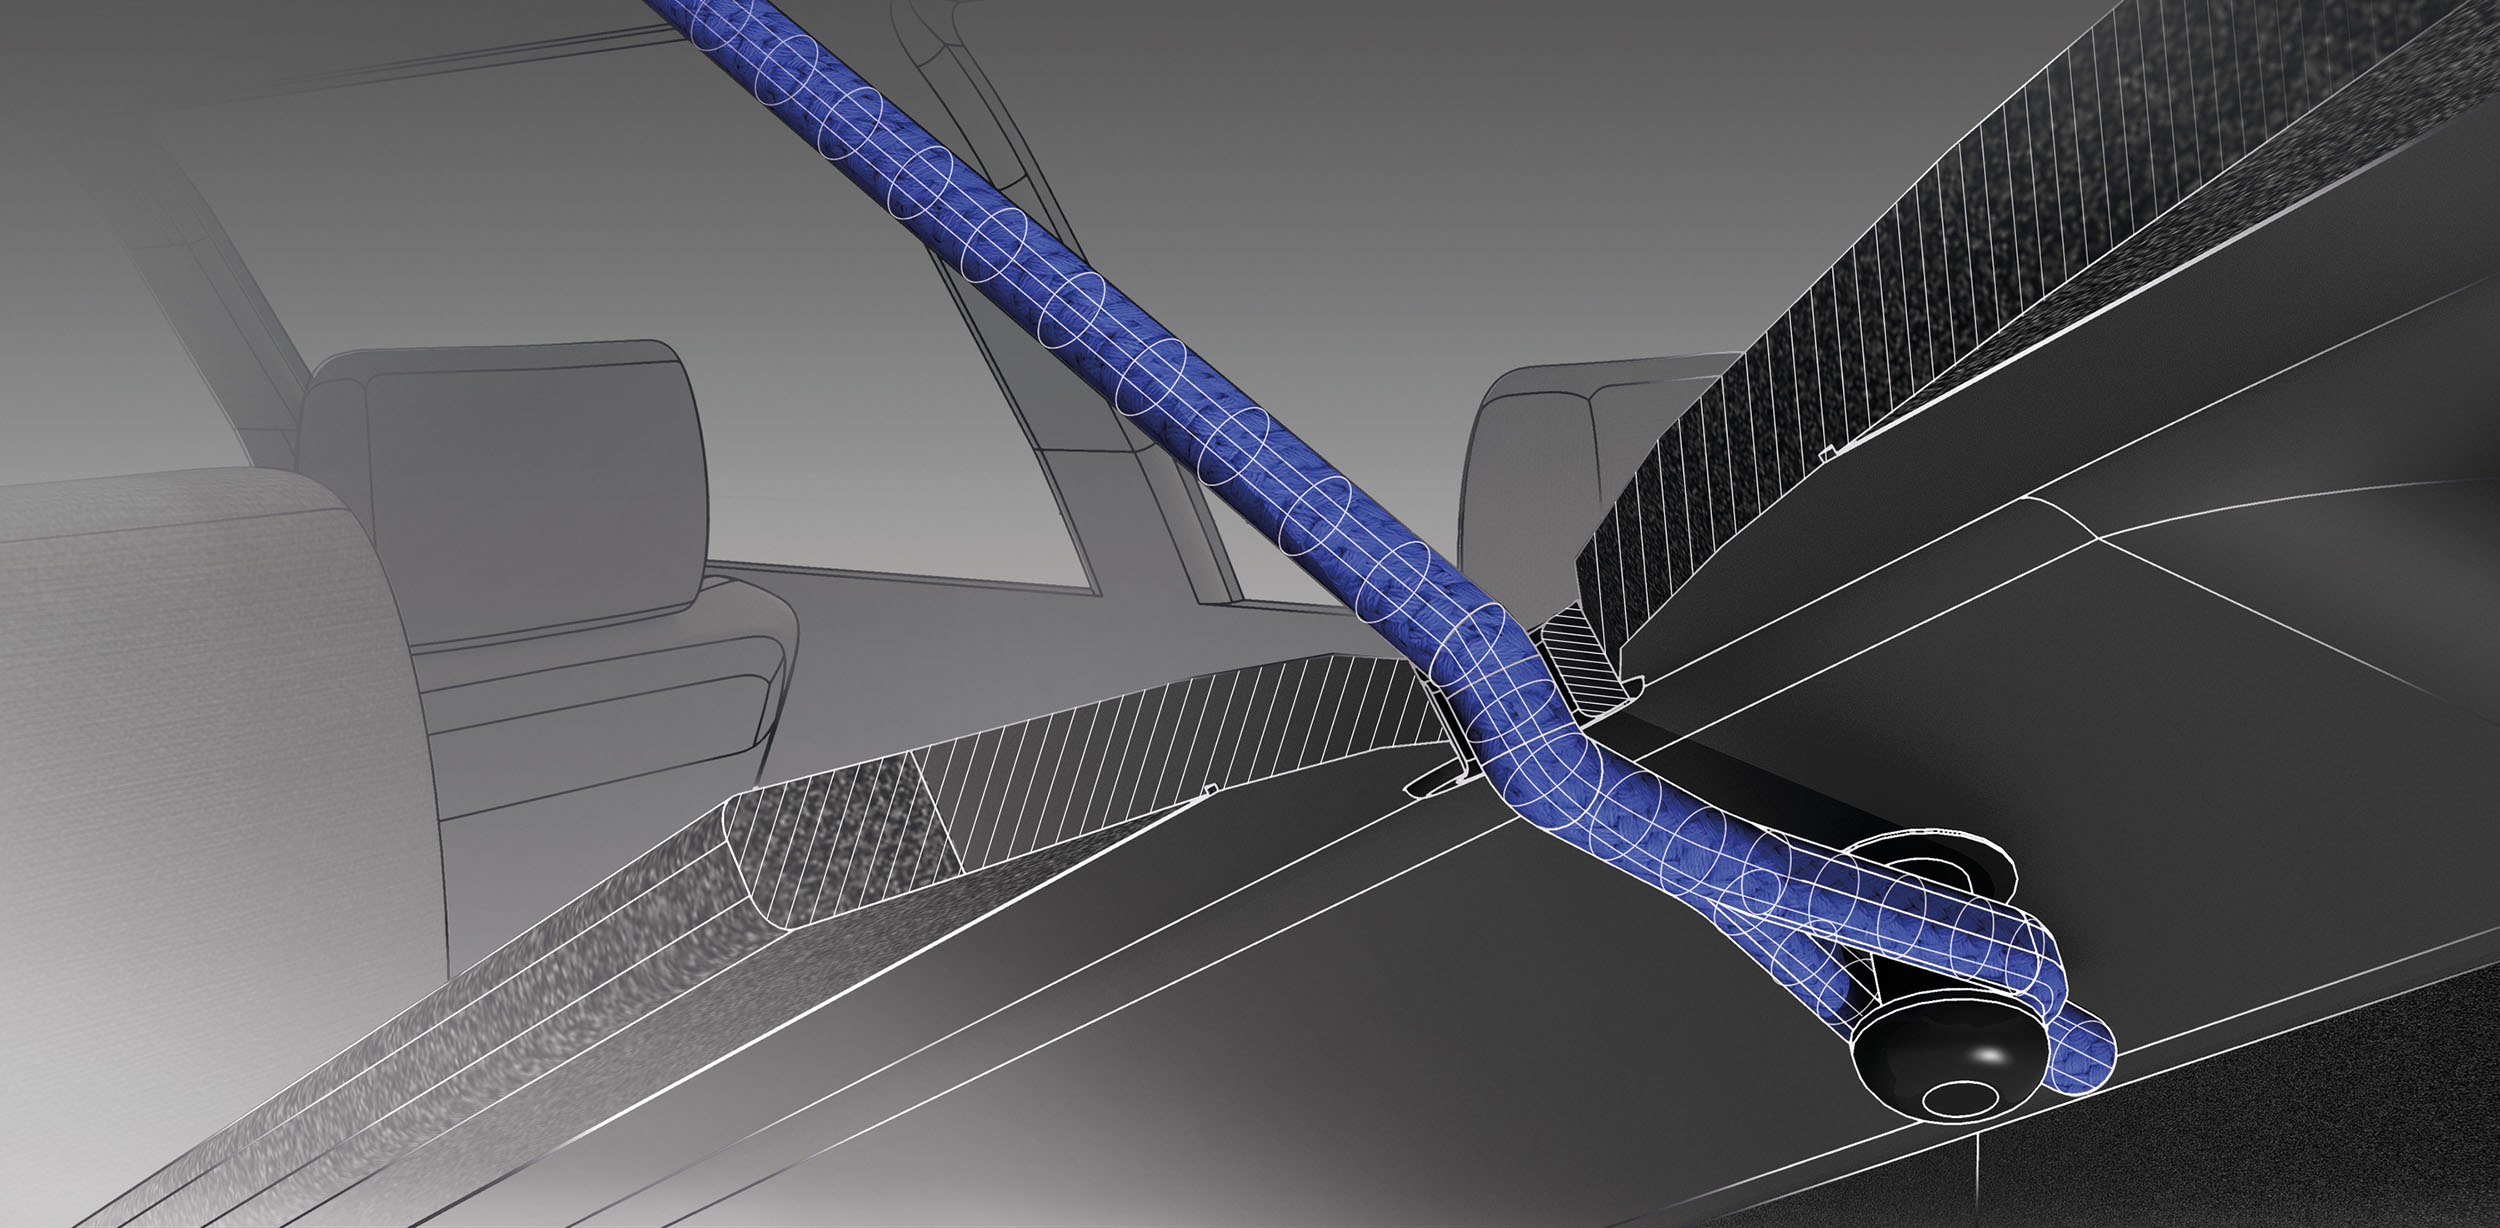 Braidings for the automotive industry – hole/bifurcation cords by JUMBO-Textil